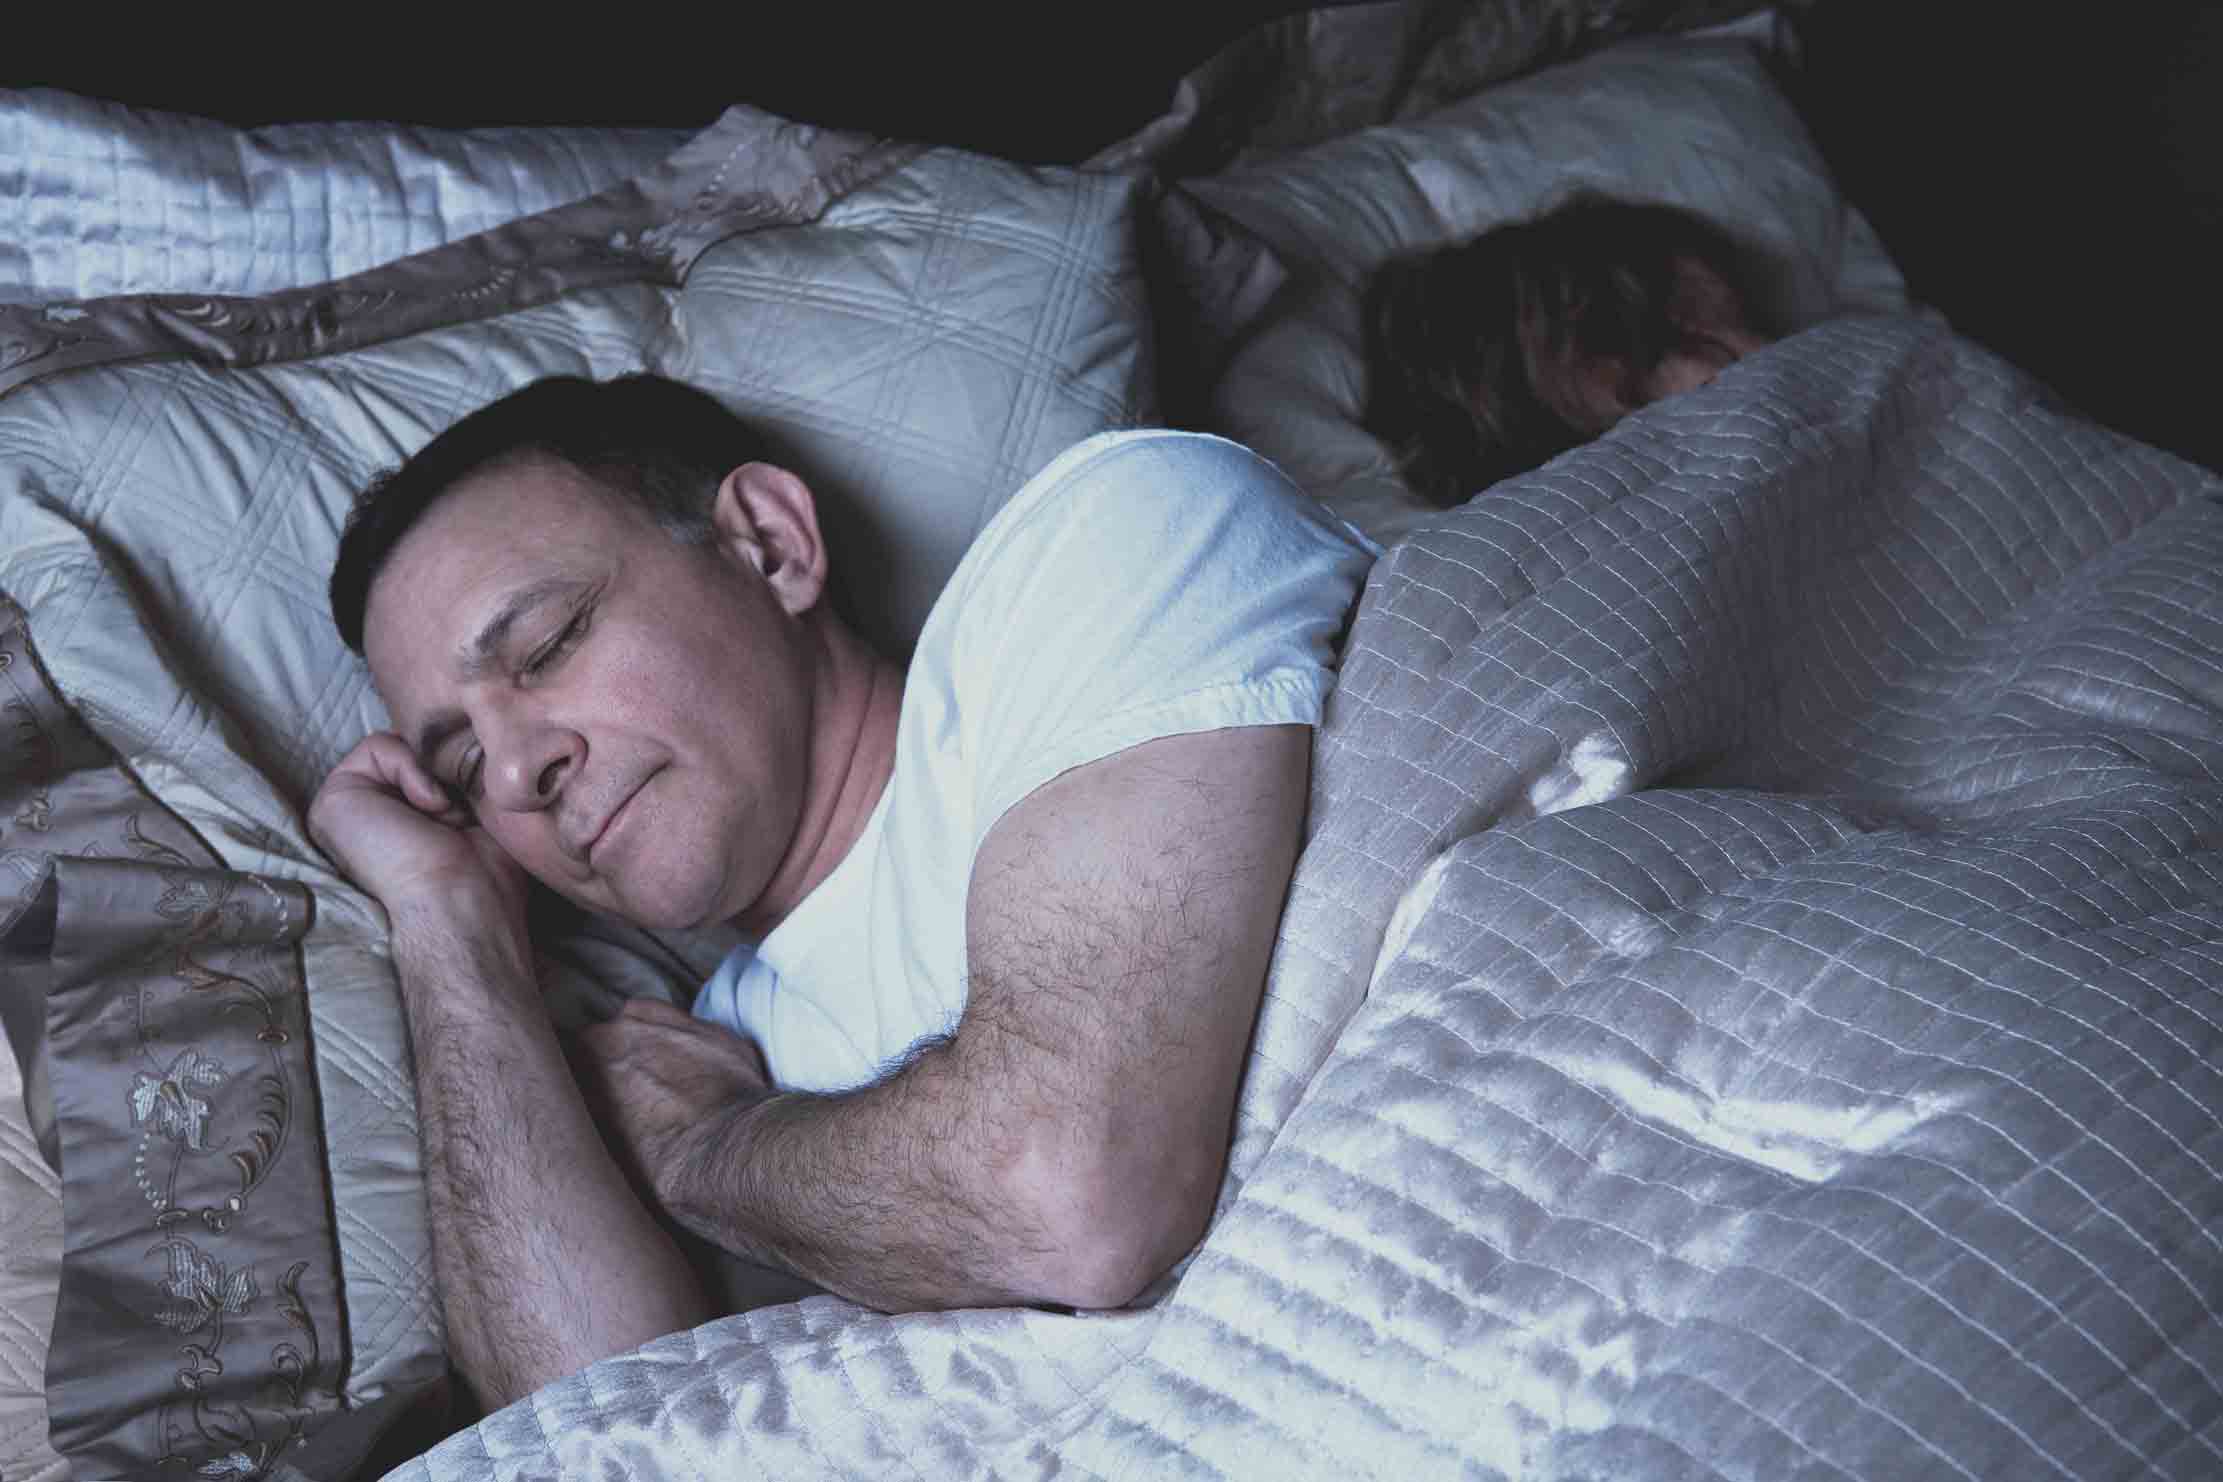 Man and woman sleeping soundly in bed.